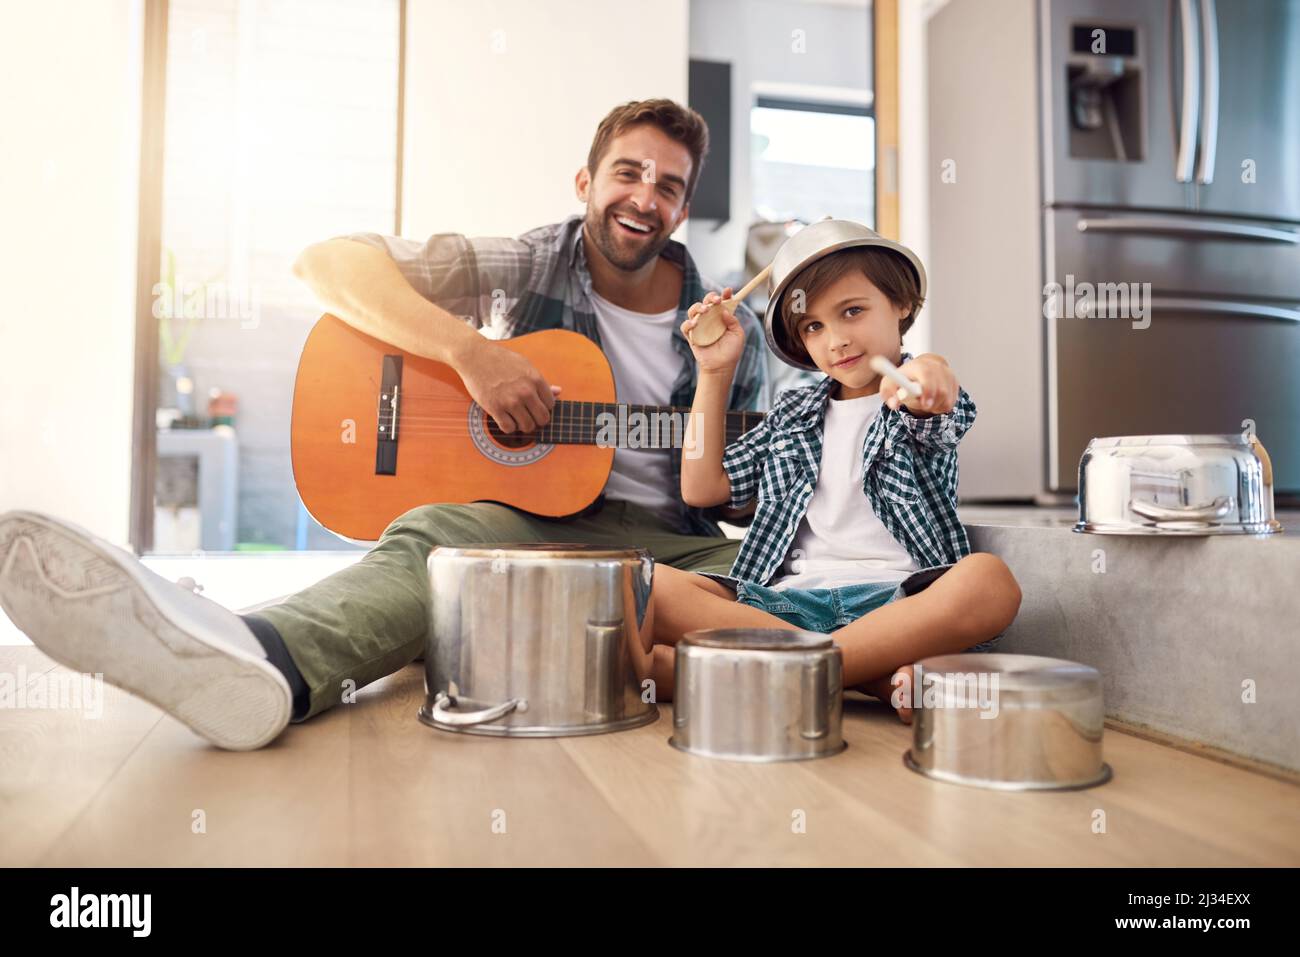 Are you ready for an encore. Portrait of a happy father accompanying his young son on the guitar while he drums on a set of cooking pots. Stock Photo